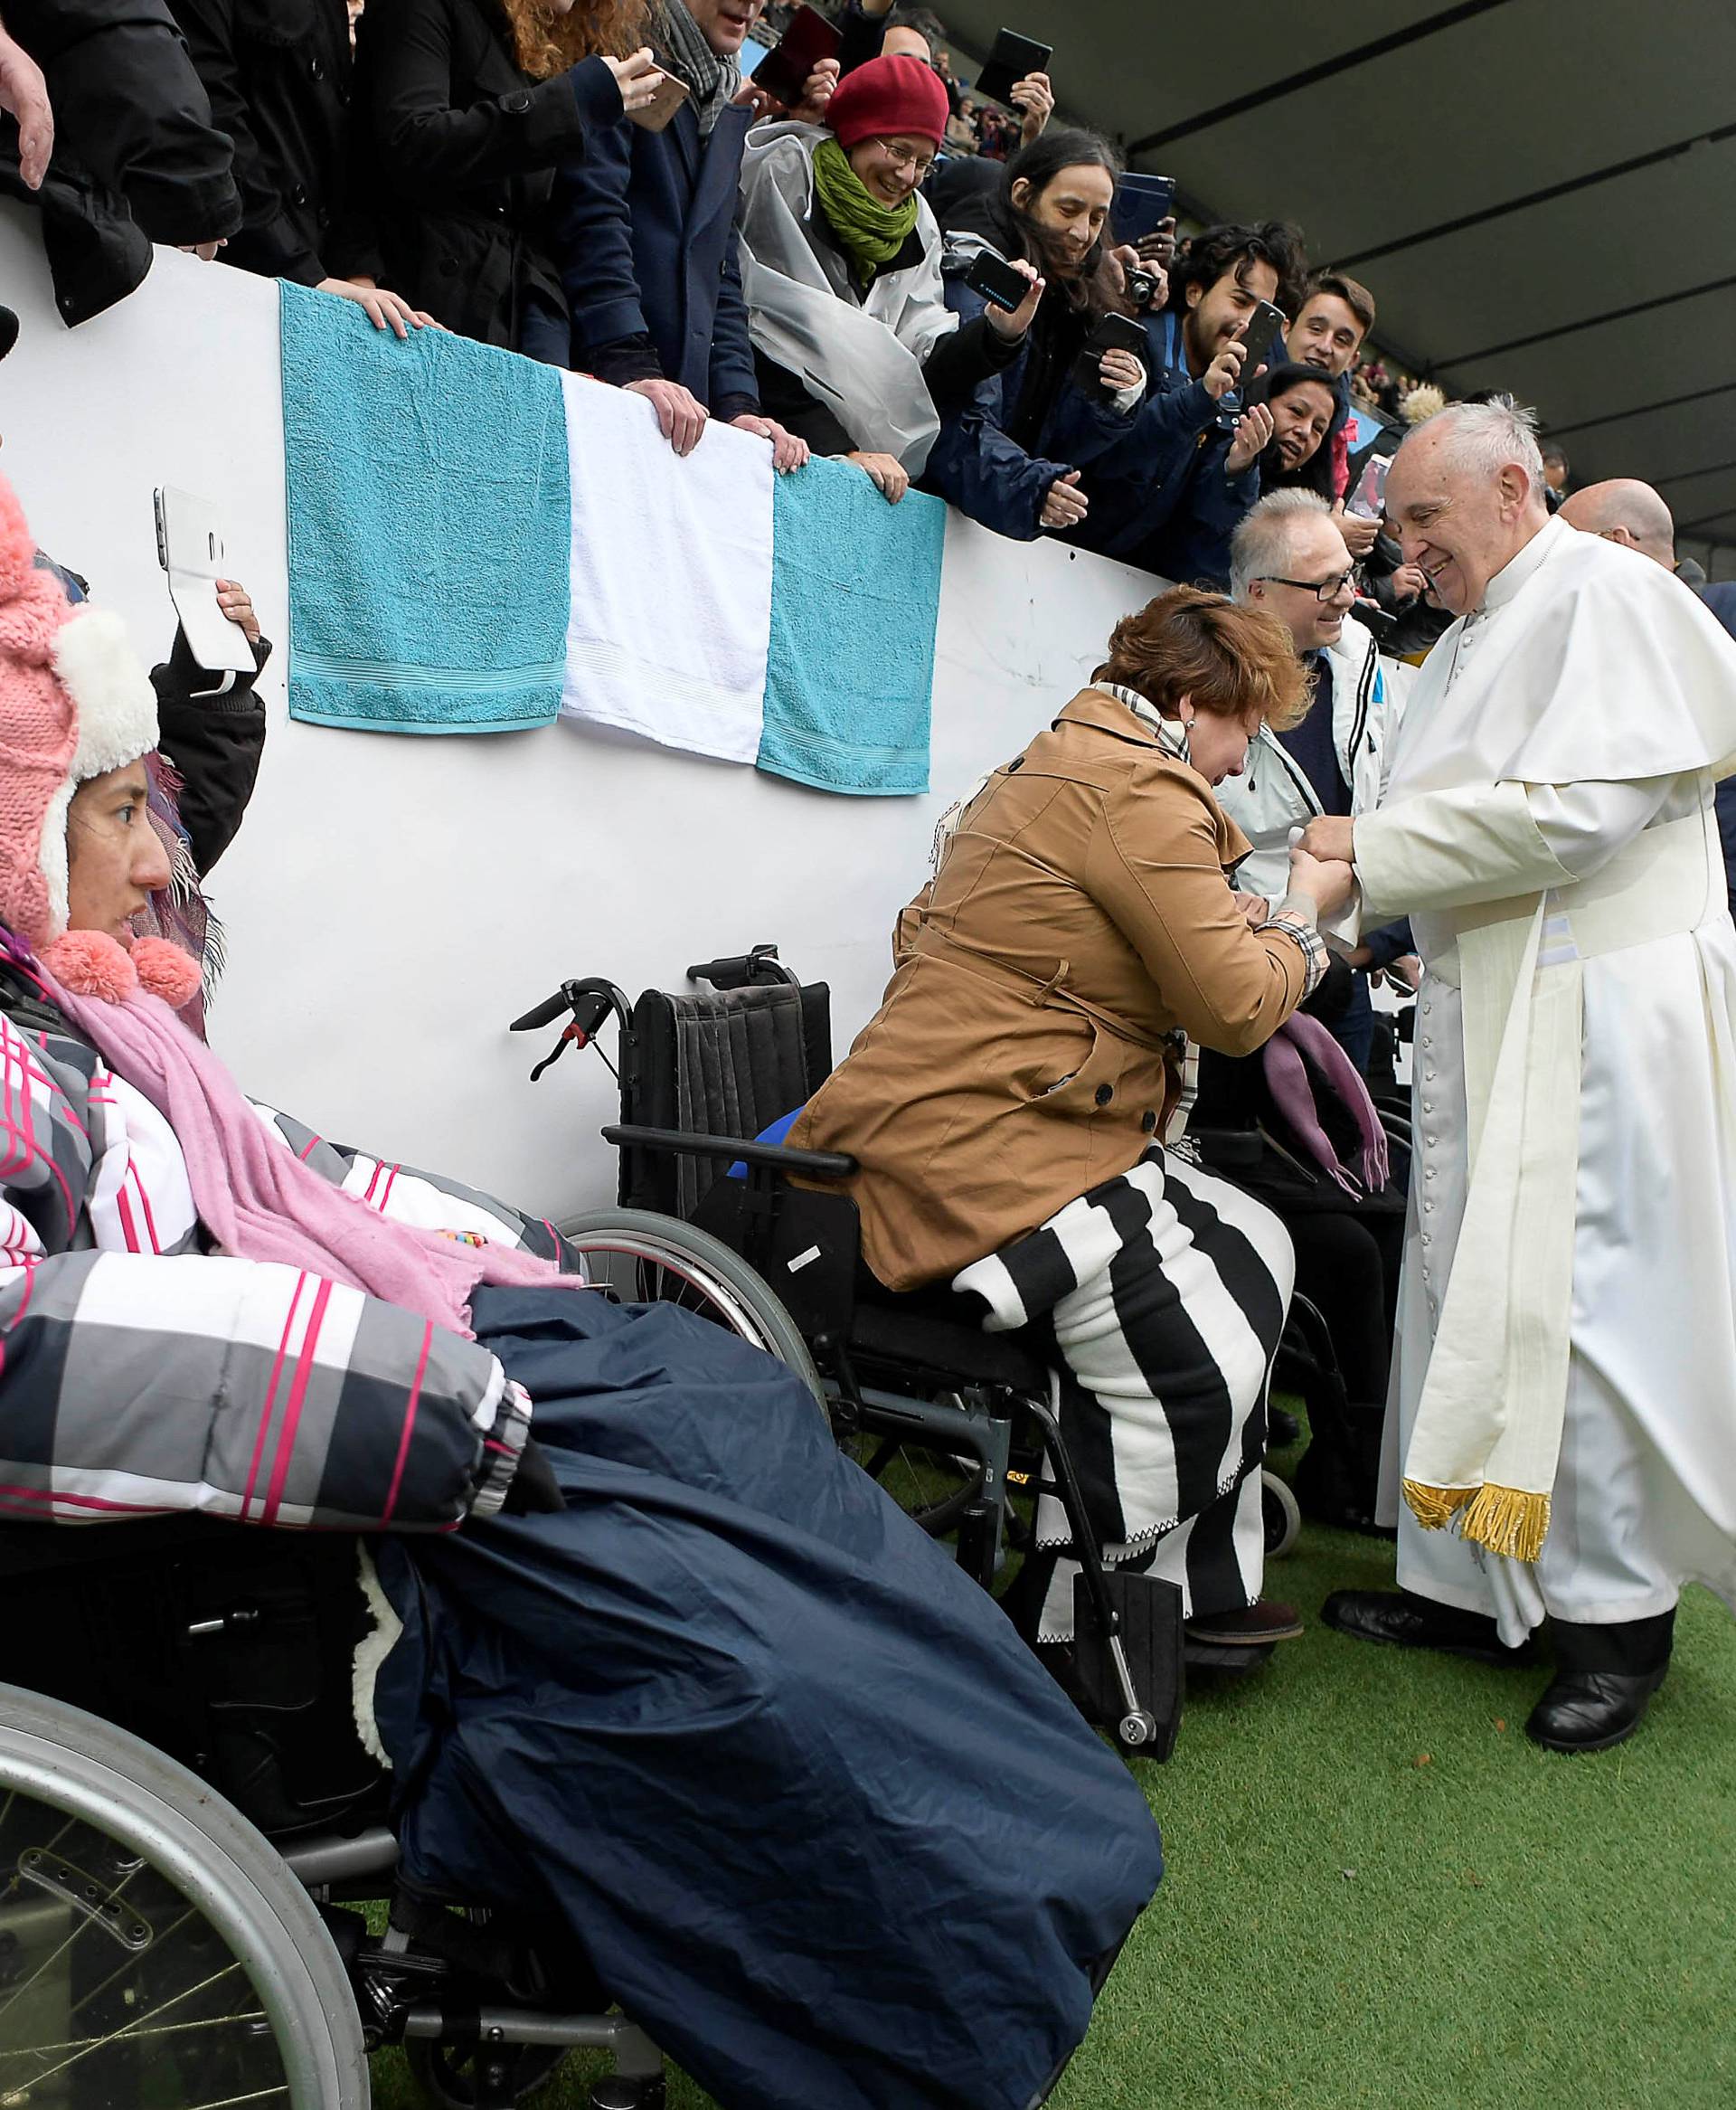 Pope Francis greets a sick person as he arrives to lead a Holy Mass at the Swedbank Stadion in Malmo